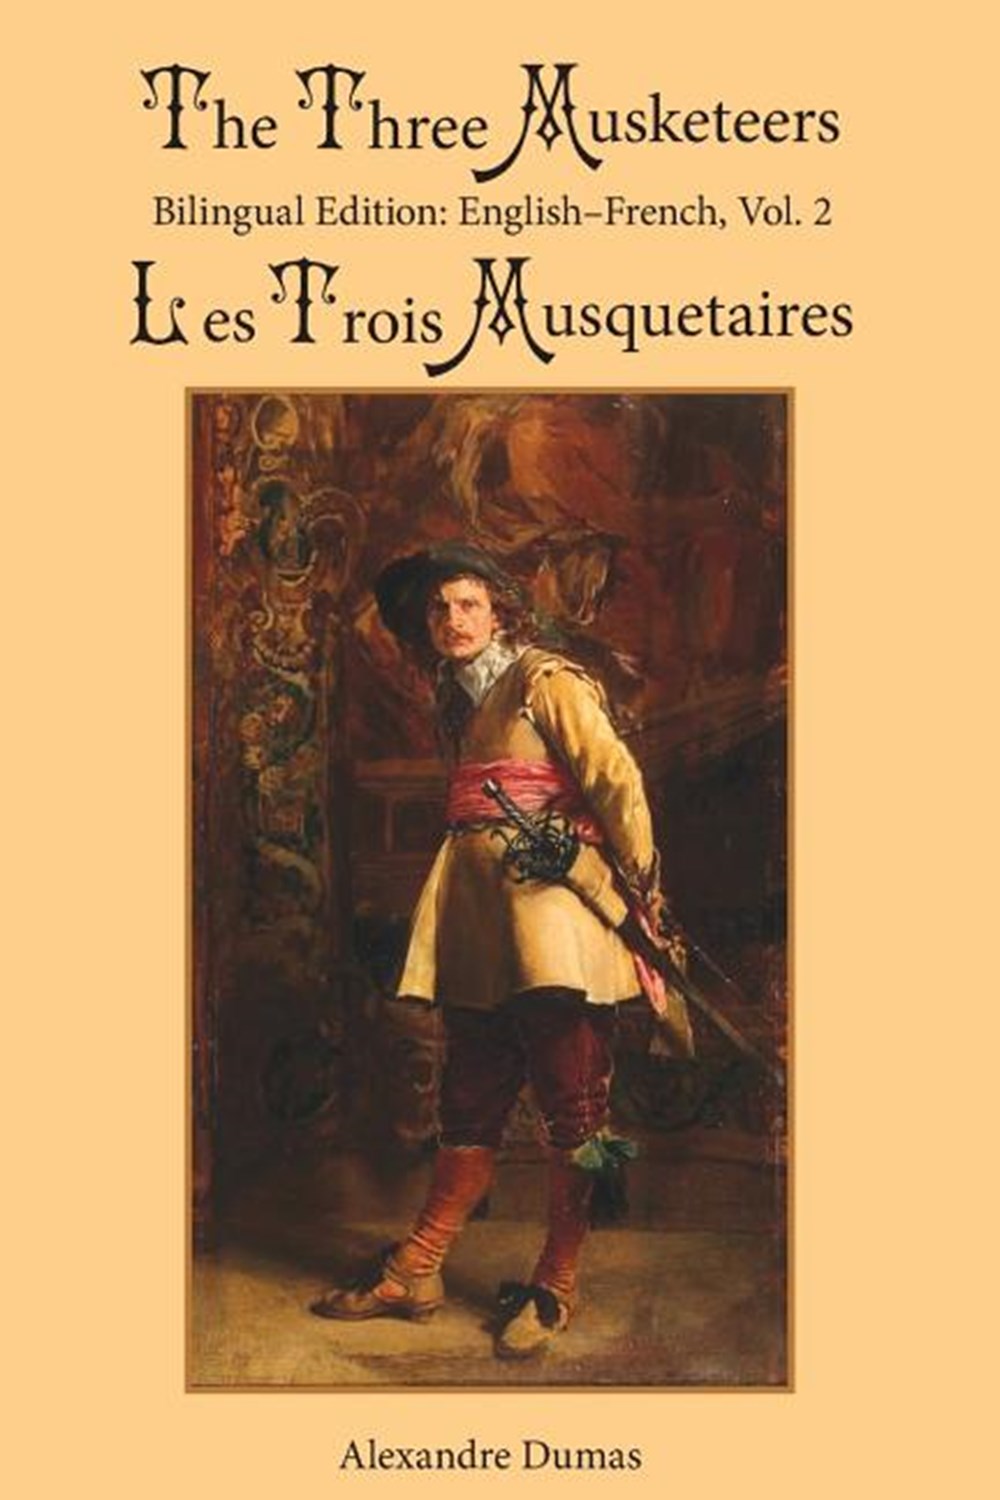 Three Musketeers, Vol. 2: Bilingual Edition: English-French